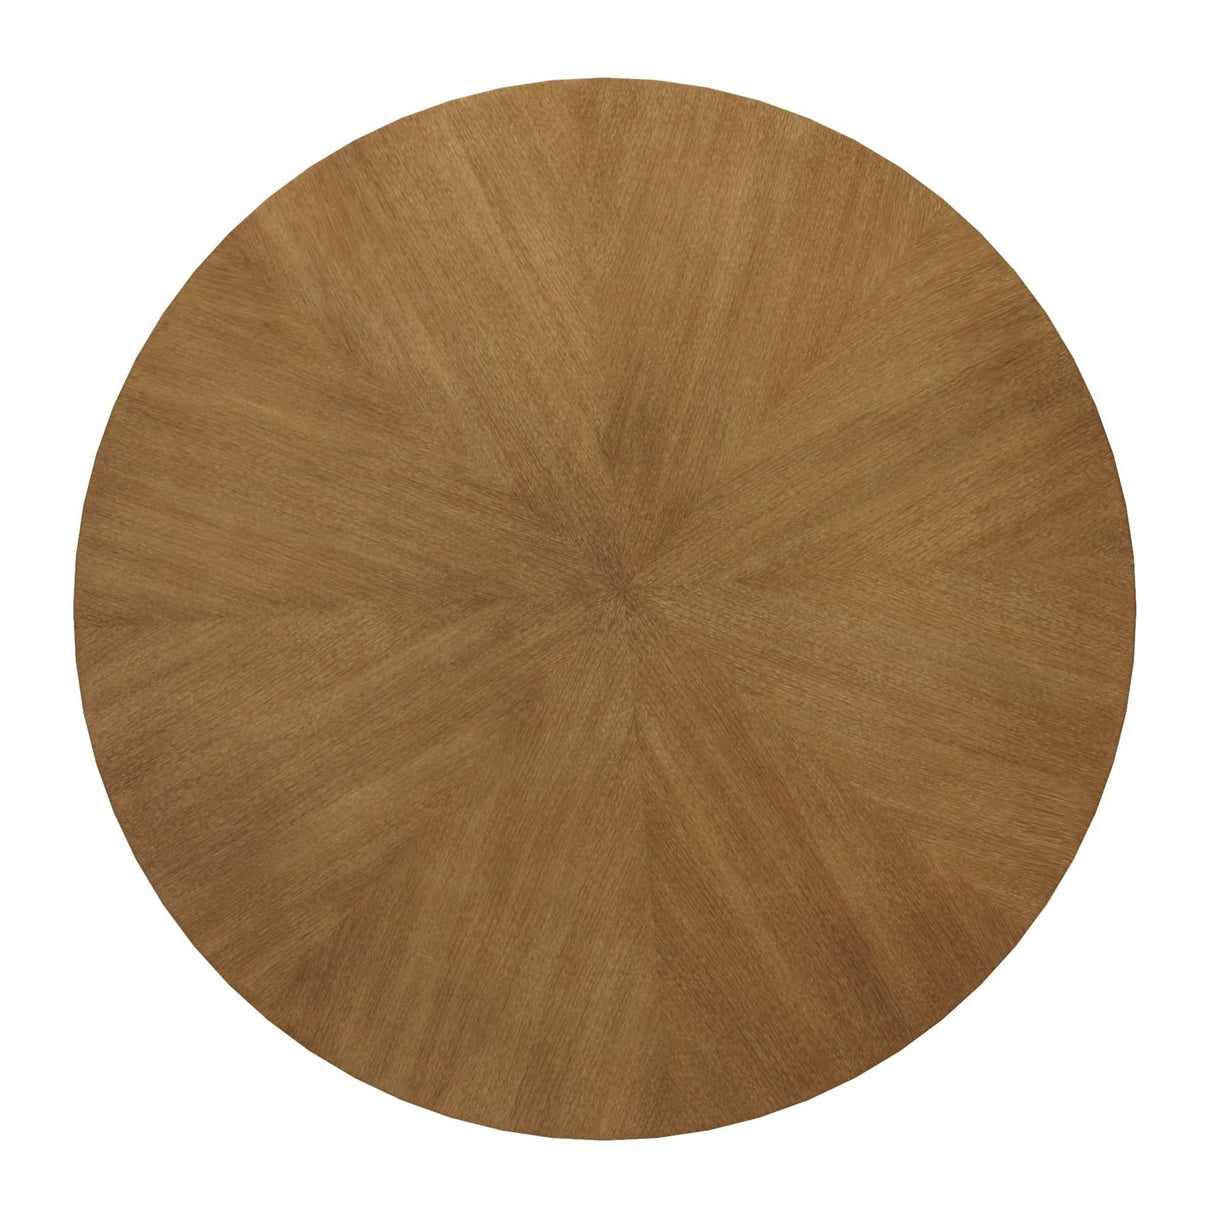 Arteriors Wilken Entry Table Wooden Round Entry Table arteriors-FDS03